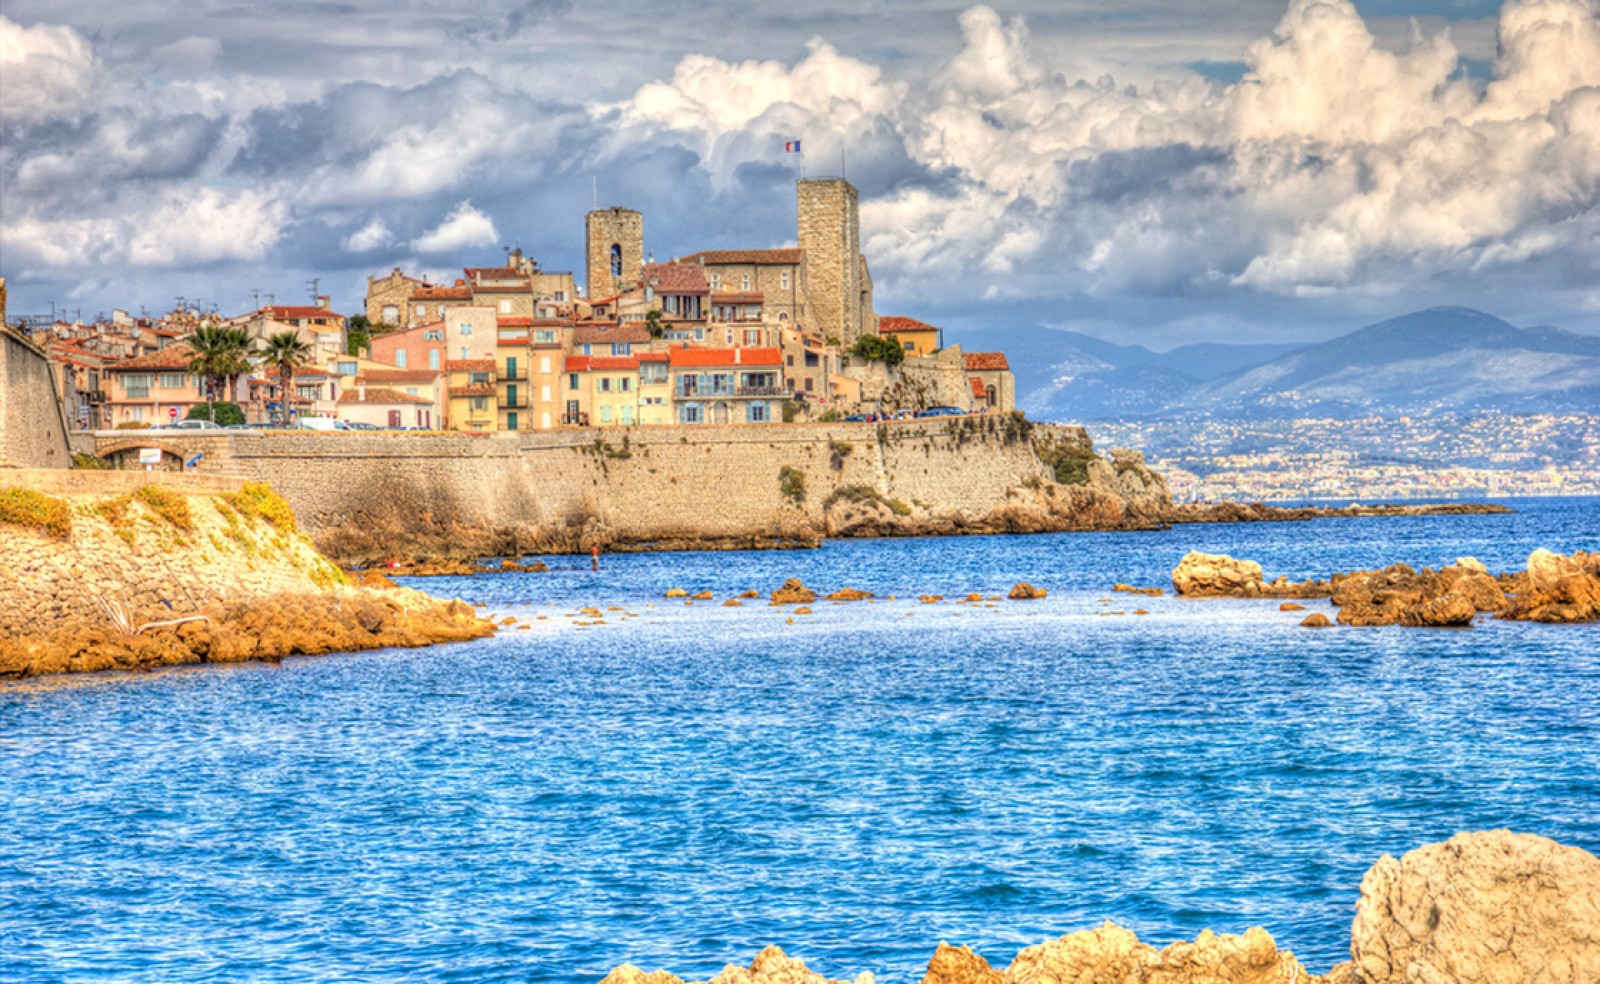 Transfer from Nice Airport to Antibes - Book your transfer 24/7 - Ruby Services - Book Your Transfer From Nice Airport to Antibes With Private Chauffeur. Airport 